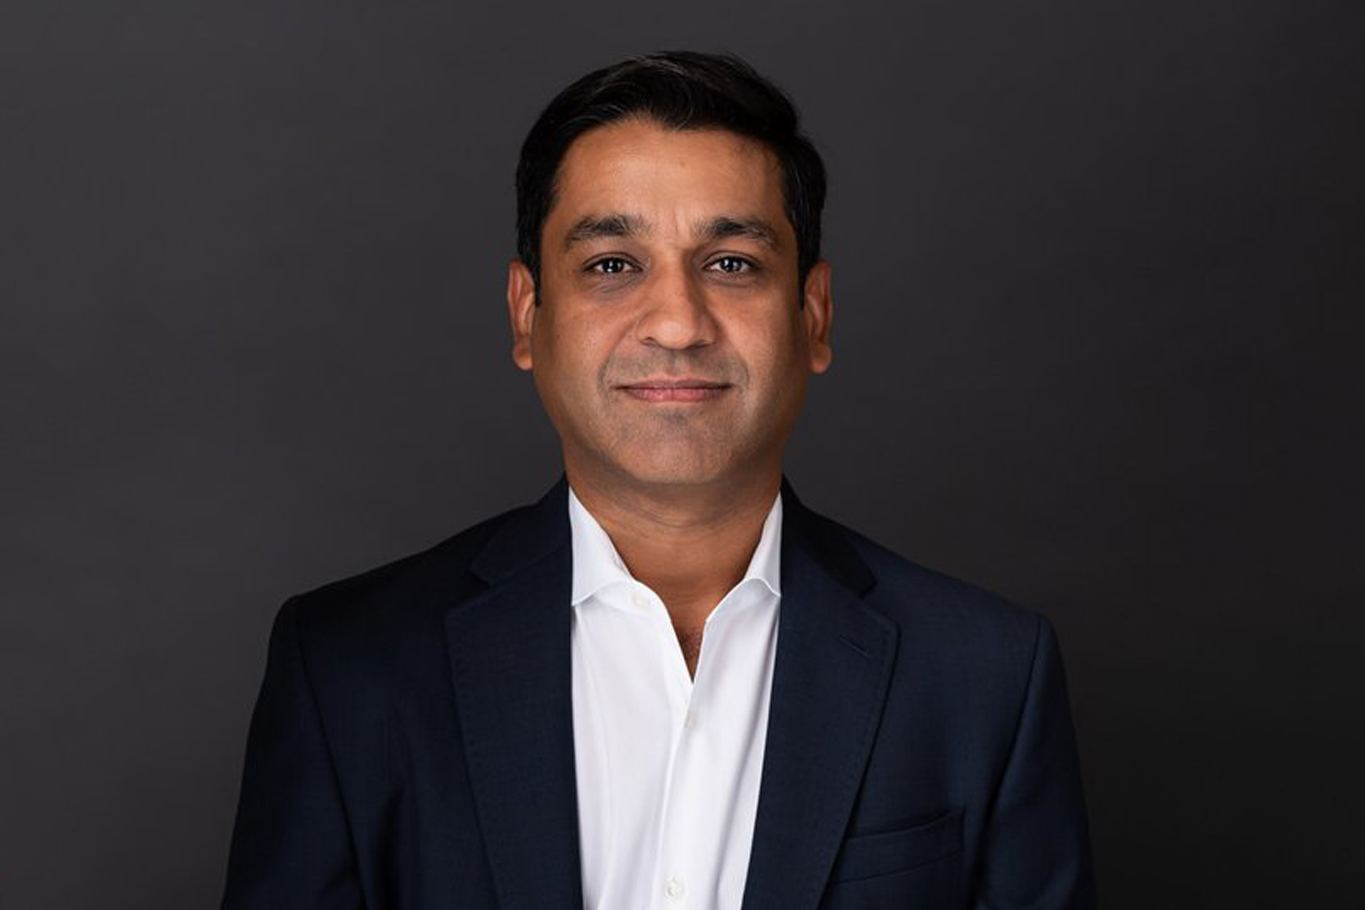 Saurabh Gupta assumes the role of Chief Financial Officer at AccentCare.